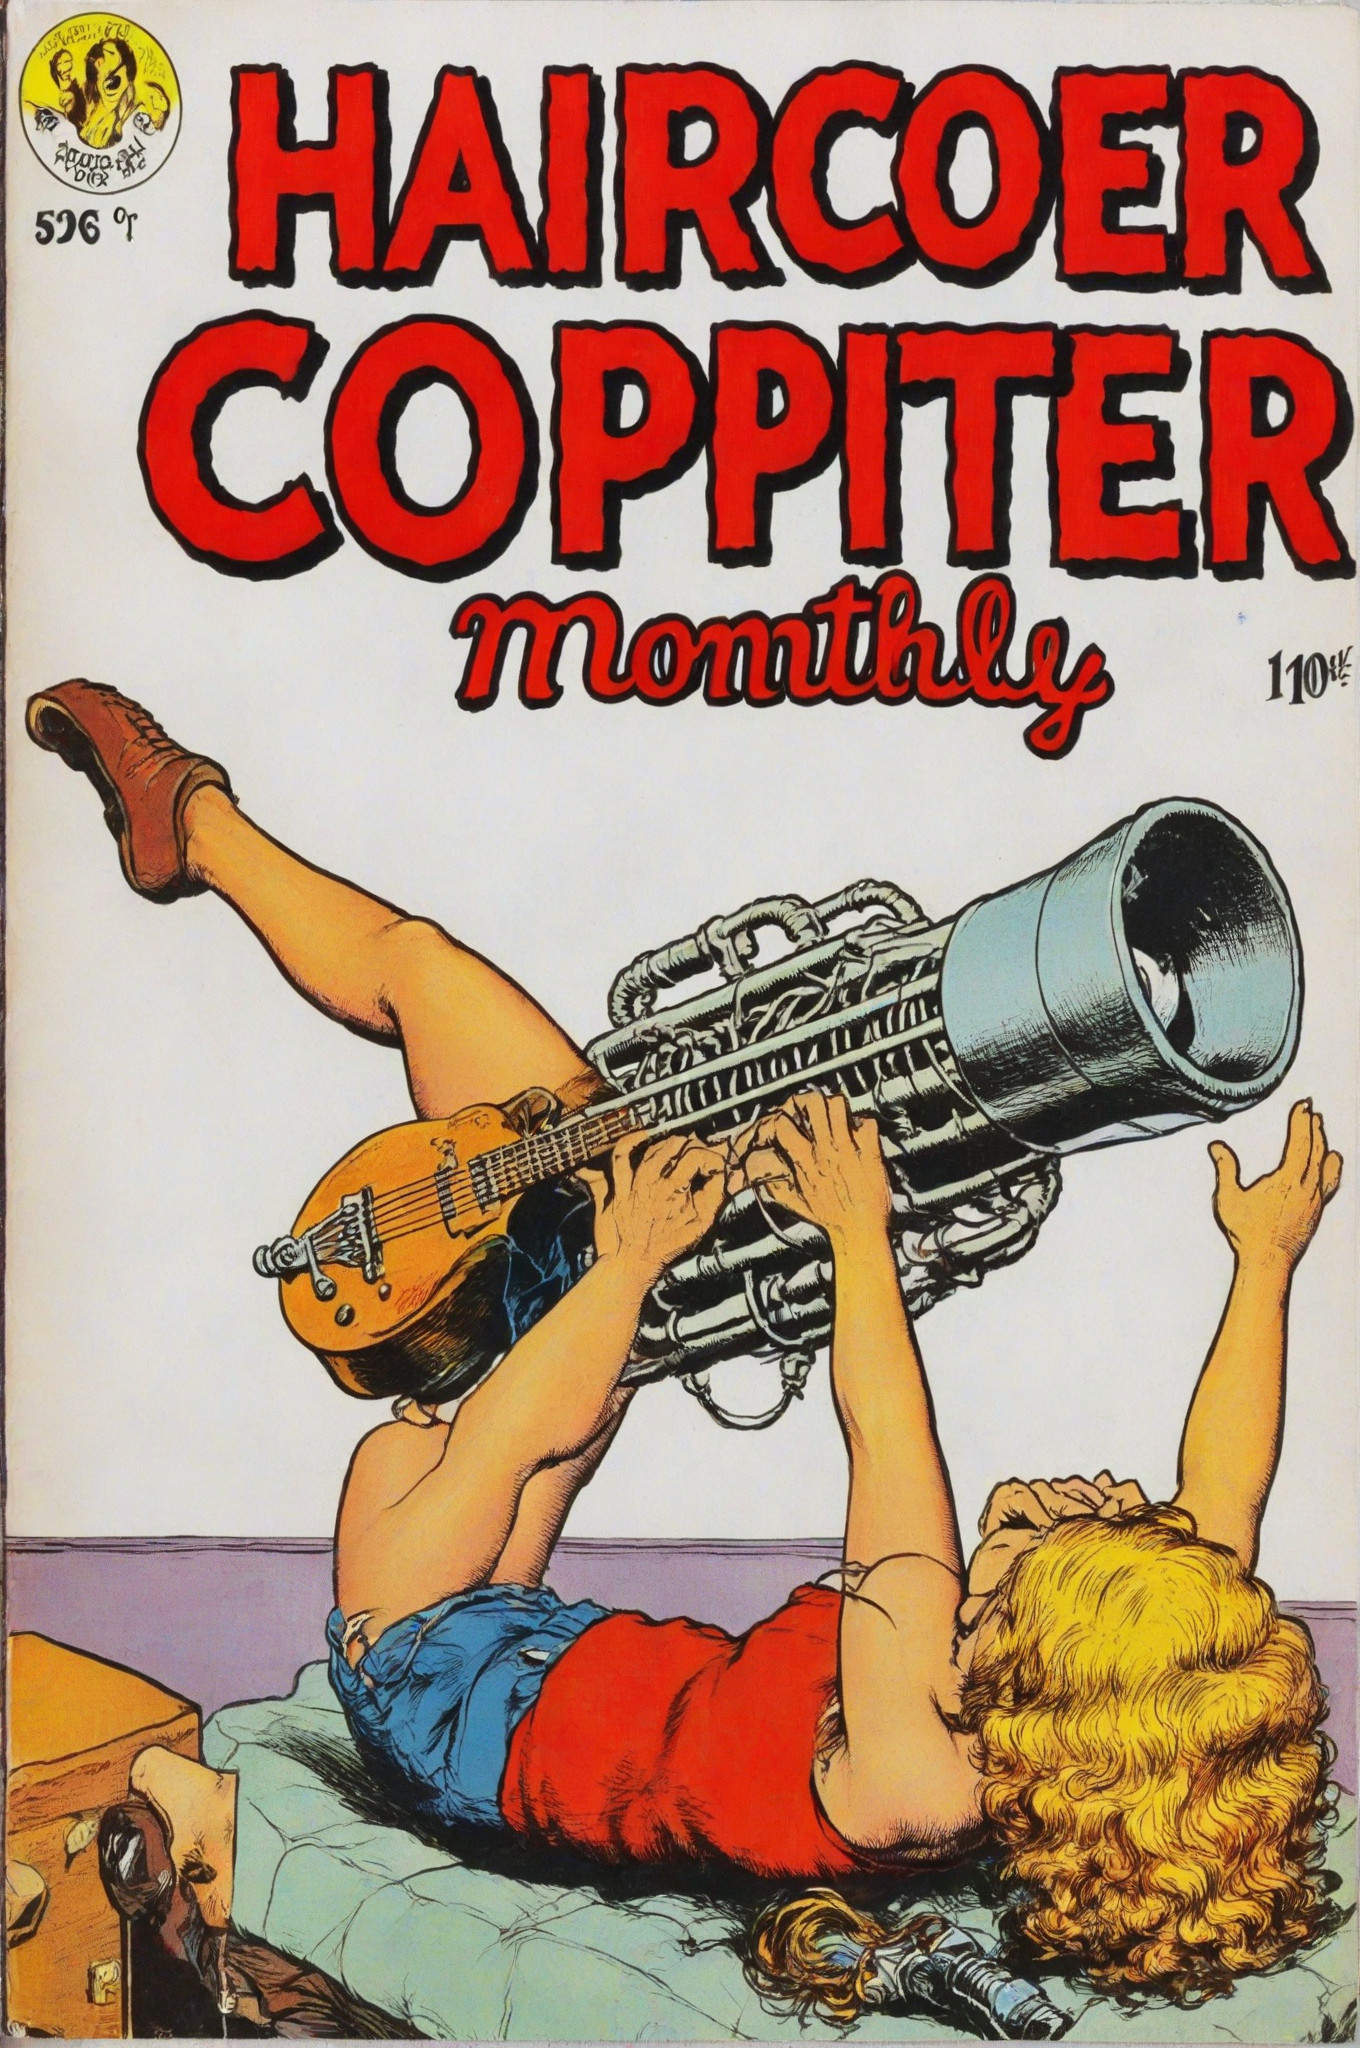 haircopter monthly, no. 110 "bedroom sound cannon"